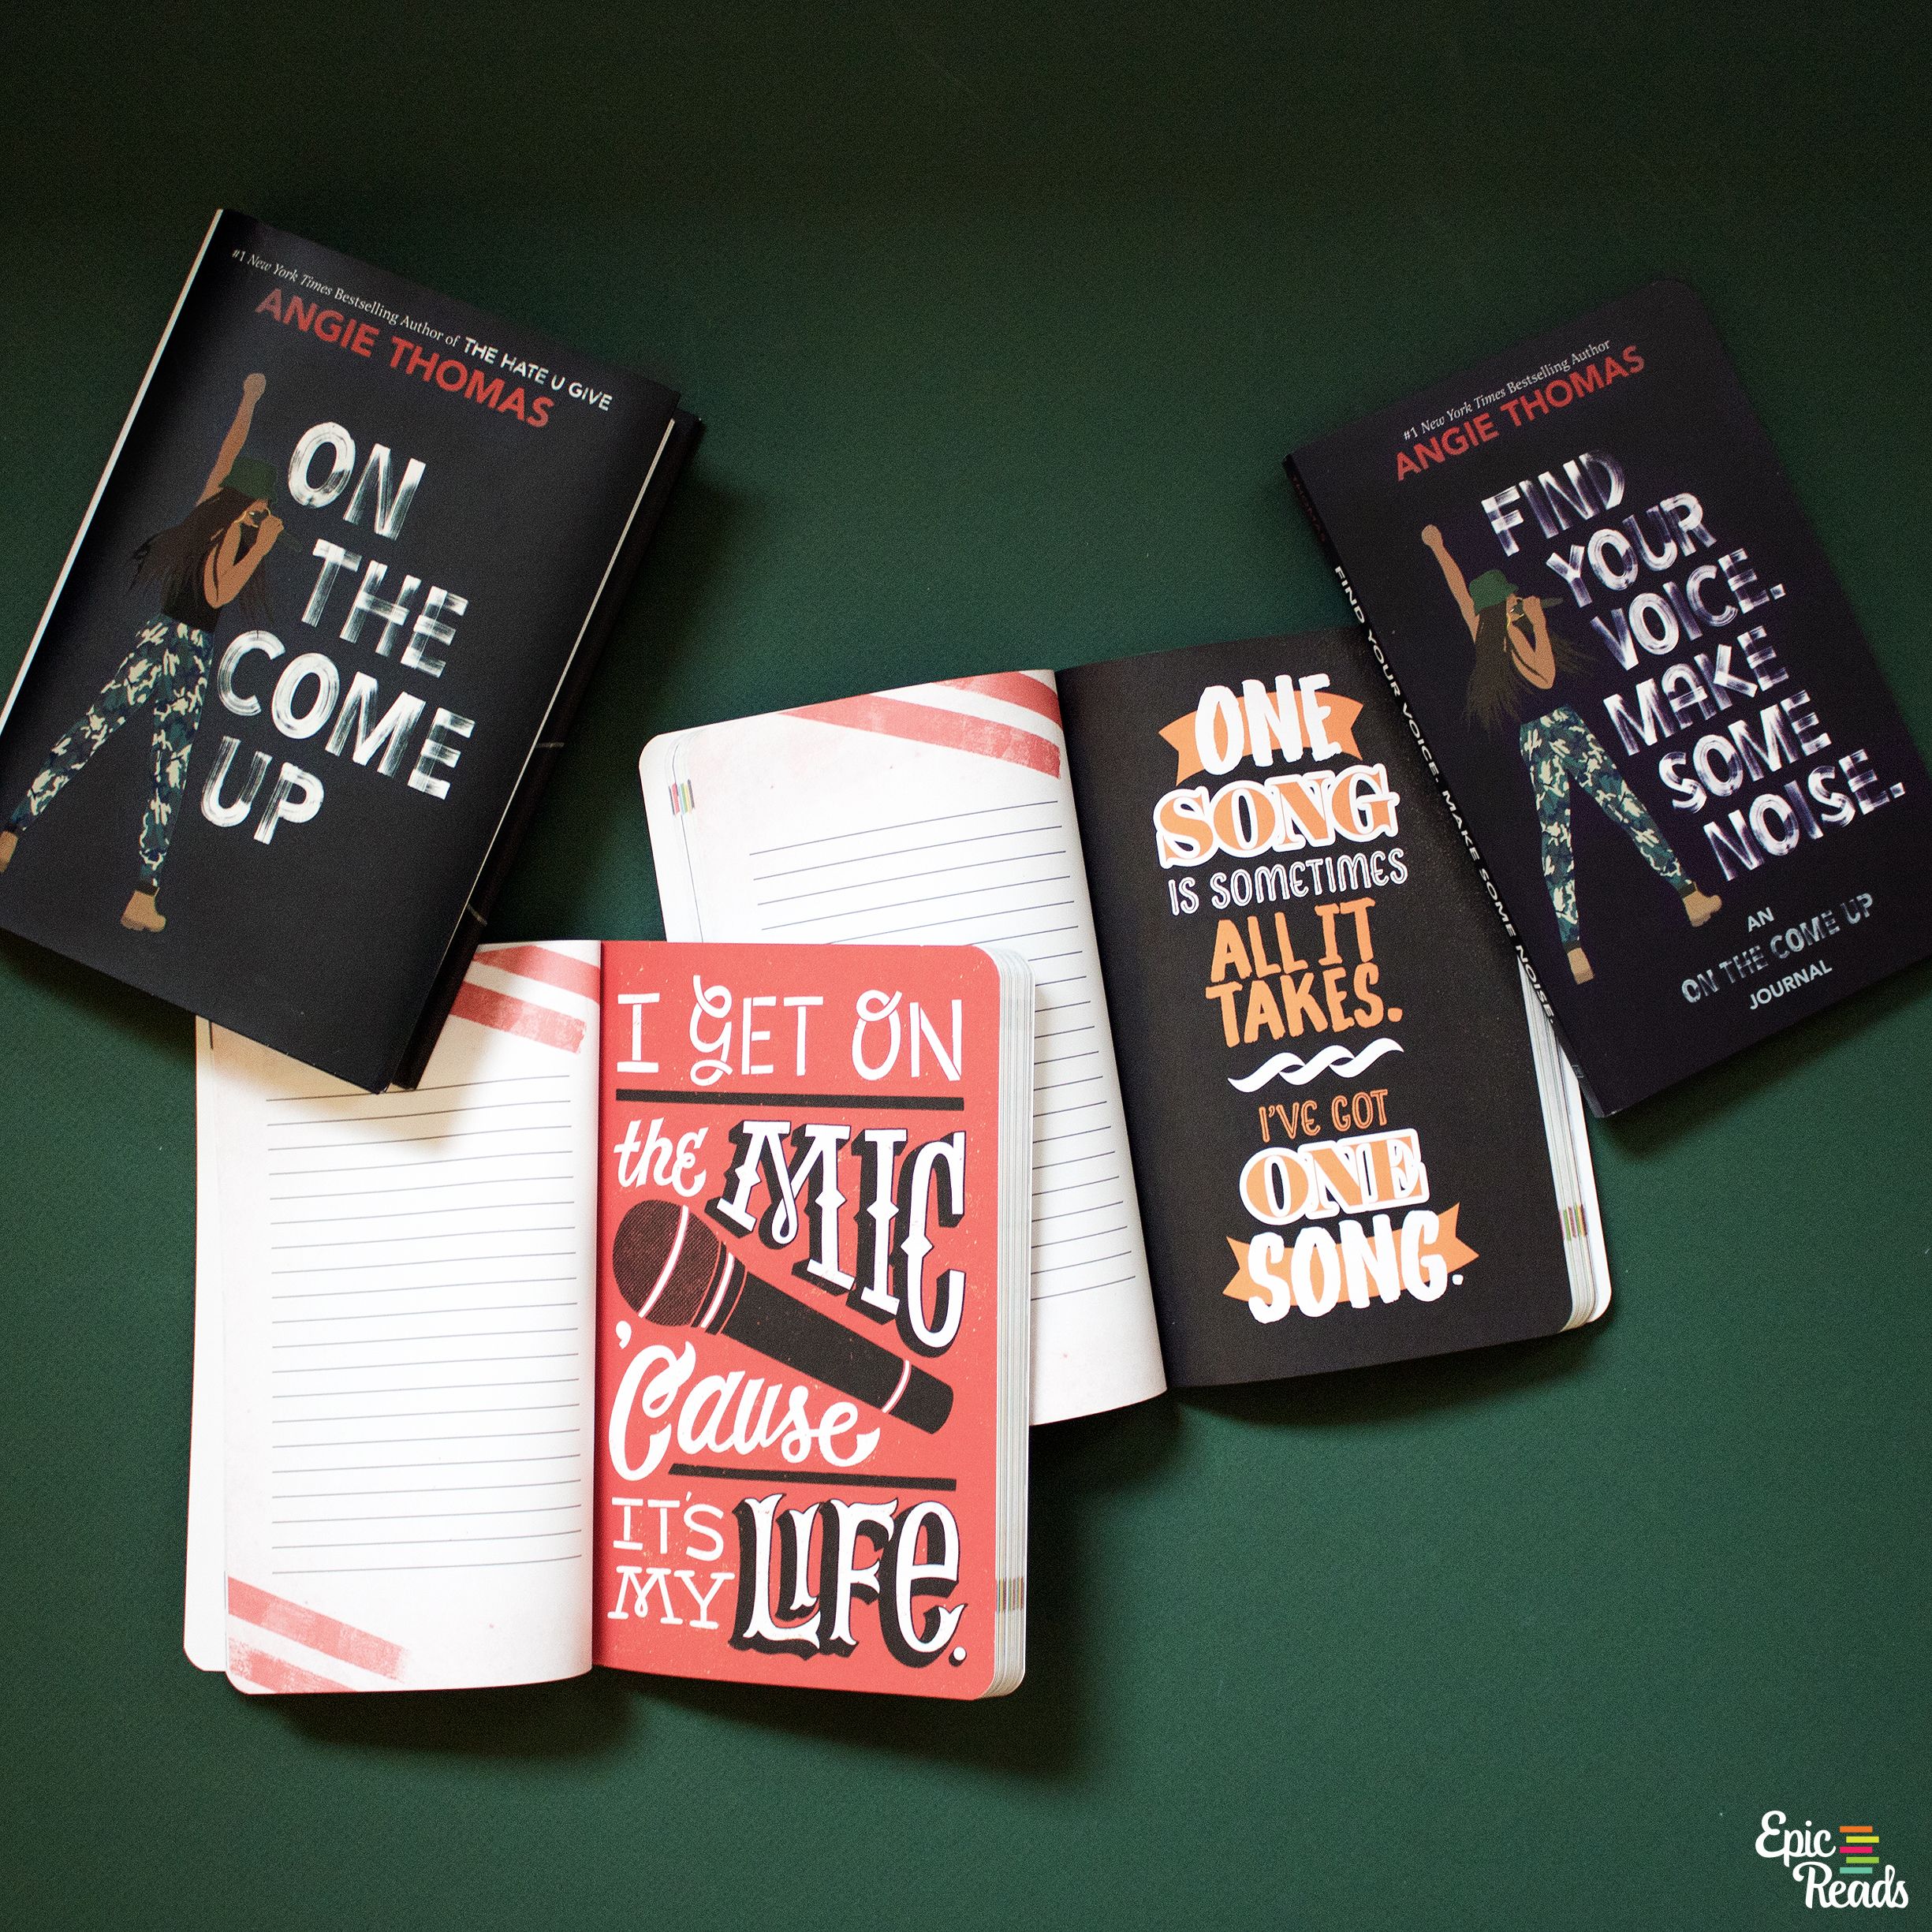 Check Out These Epic 'On the Come Up' Phone Wallpaper & Journals